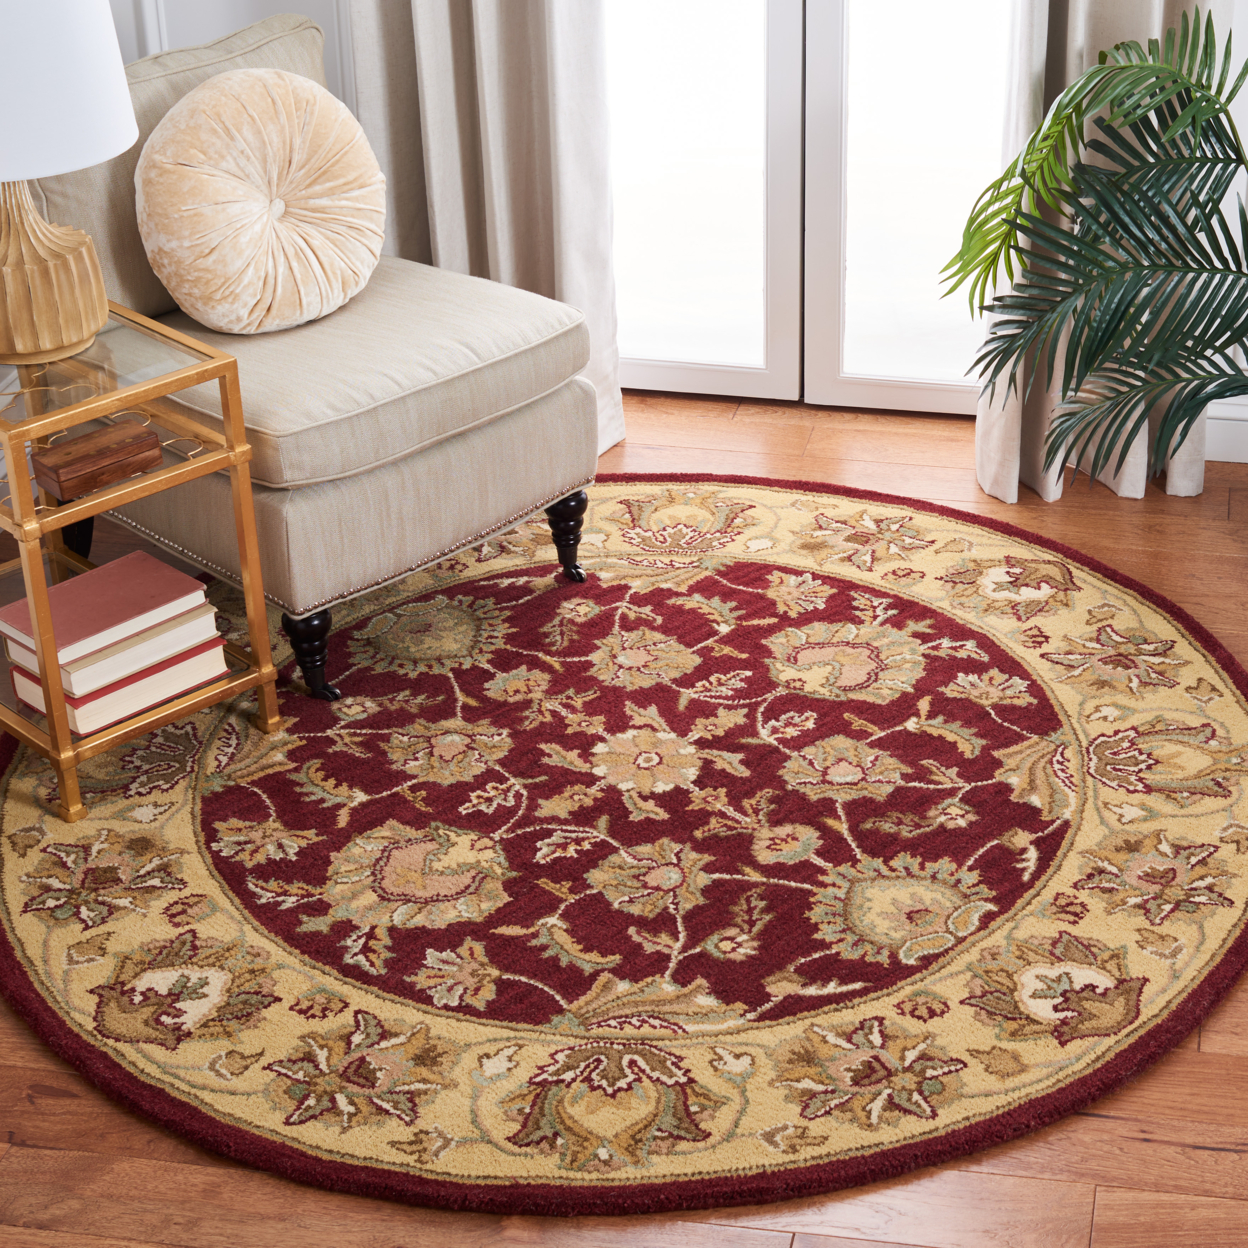 SAFAVIEH Heritage Regis Traditional Wool Area Rug, Red/Gold, 5' x 8' - image 2 of 10